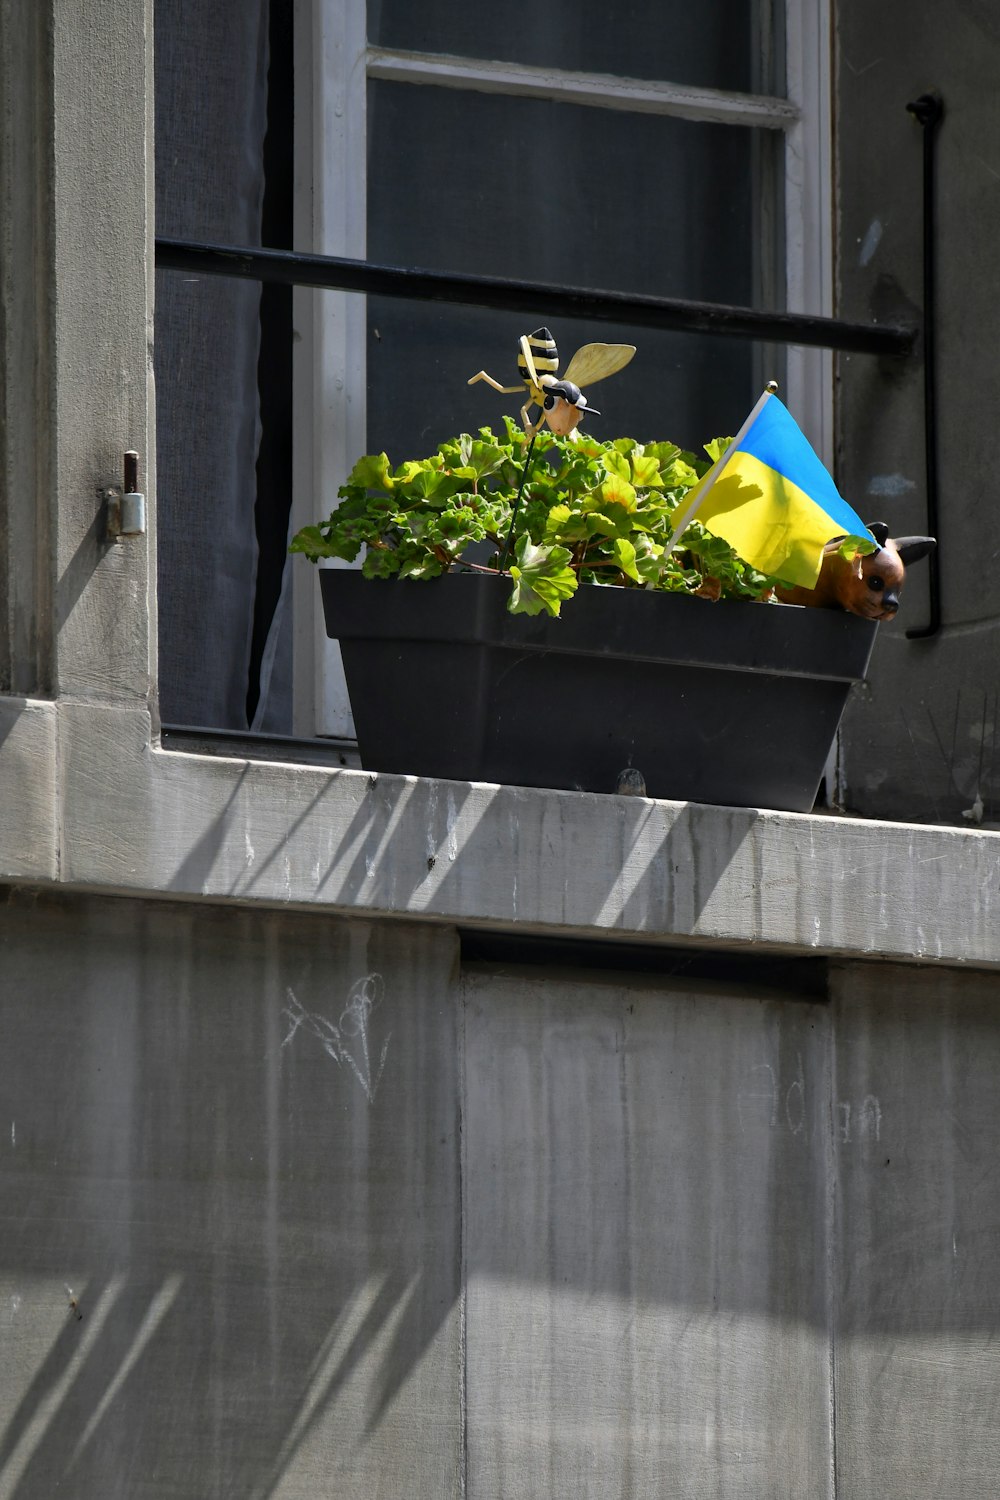 a potted plant with a blue and yellow umbrella